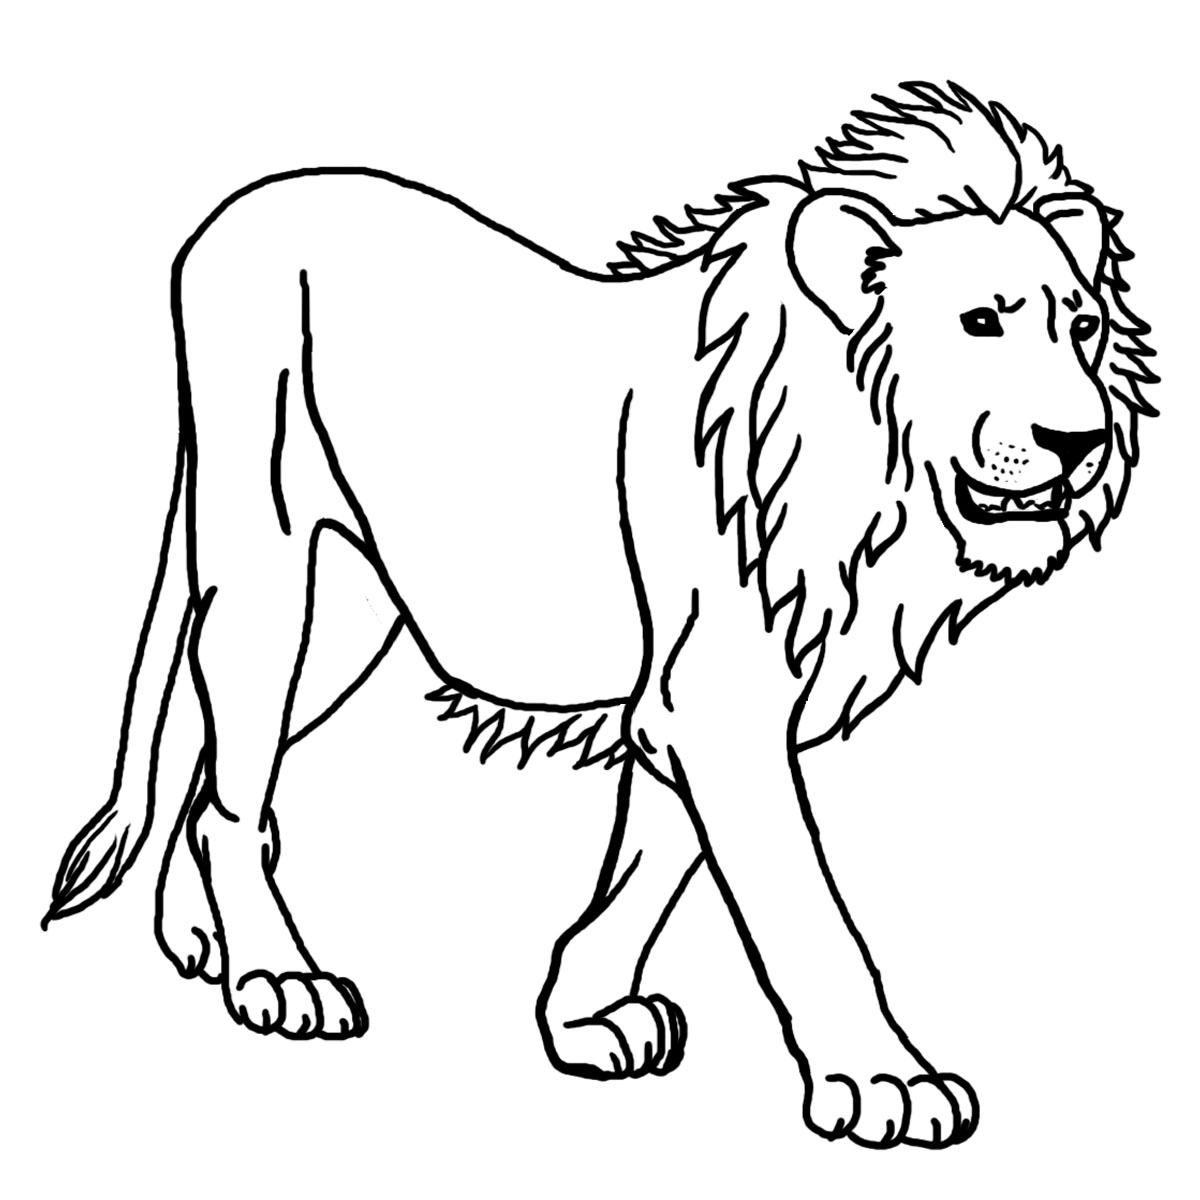 coloring page of a lion fun learn free worksheets for kid ภาพระบายส the lion a page of lion coloring 